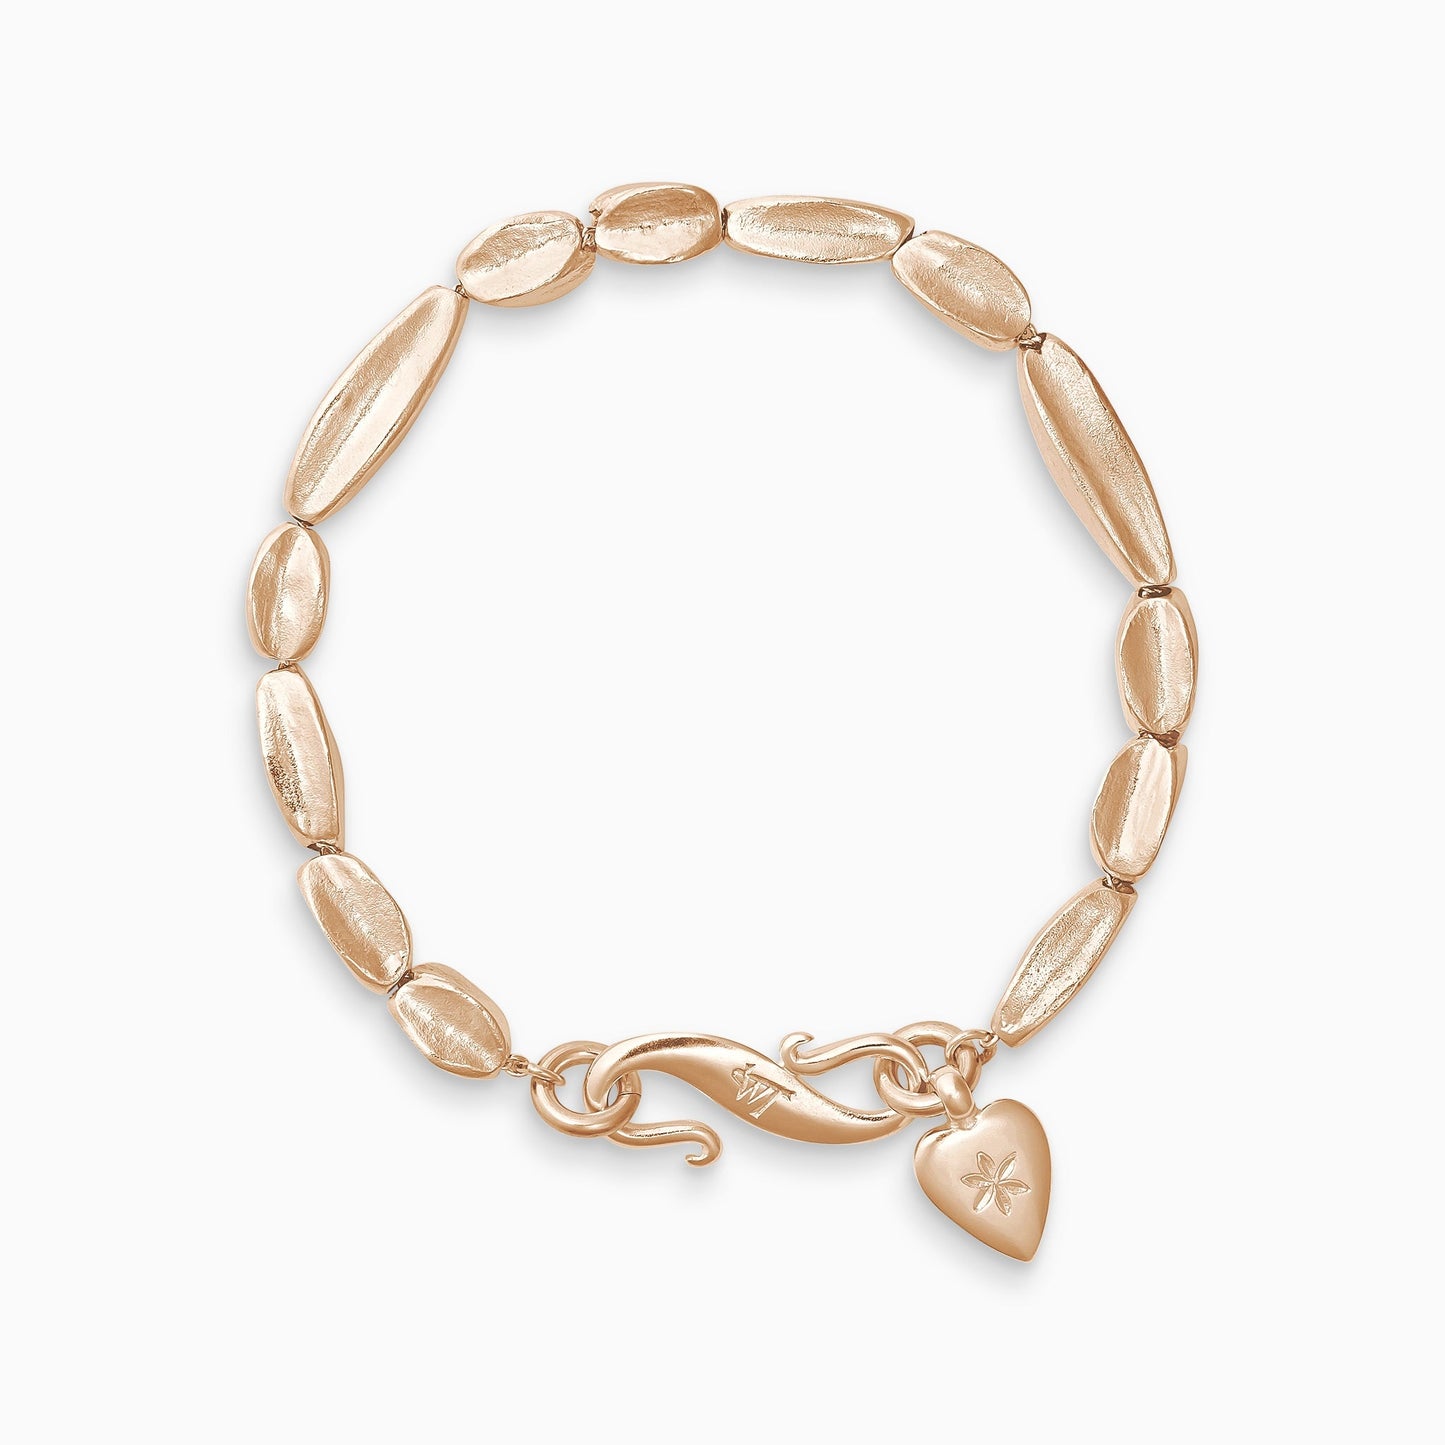 An 18ct Fairtrade rose gold bracelet of handmade organic, concave, square section textured ‘Baluba’ beads. Finished with a smooth heart shaped charm, engraved with a 6 petal flower and our signature ’S’ clasp. Bracelet length 210mm. Beads varying lengths from 10mm to 40mm. Cross section of each bead approximately 6mm.